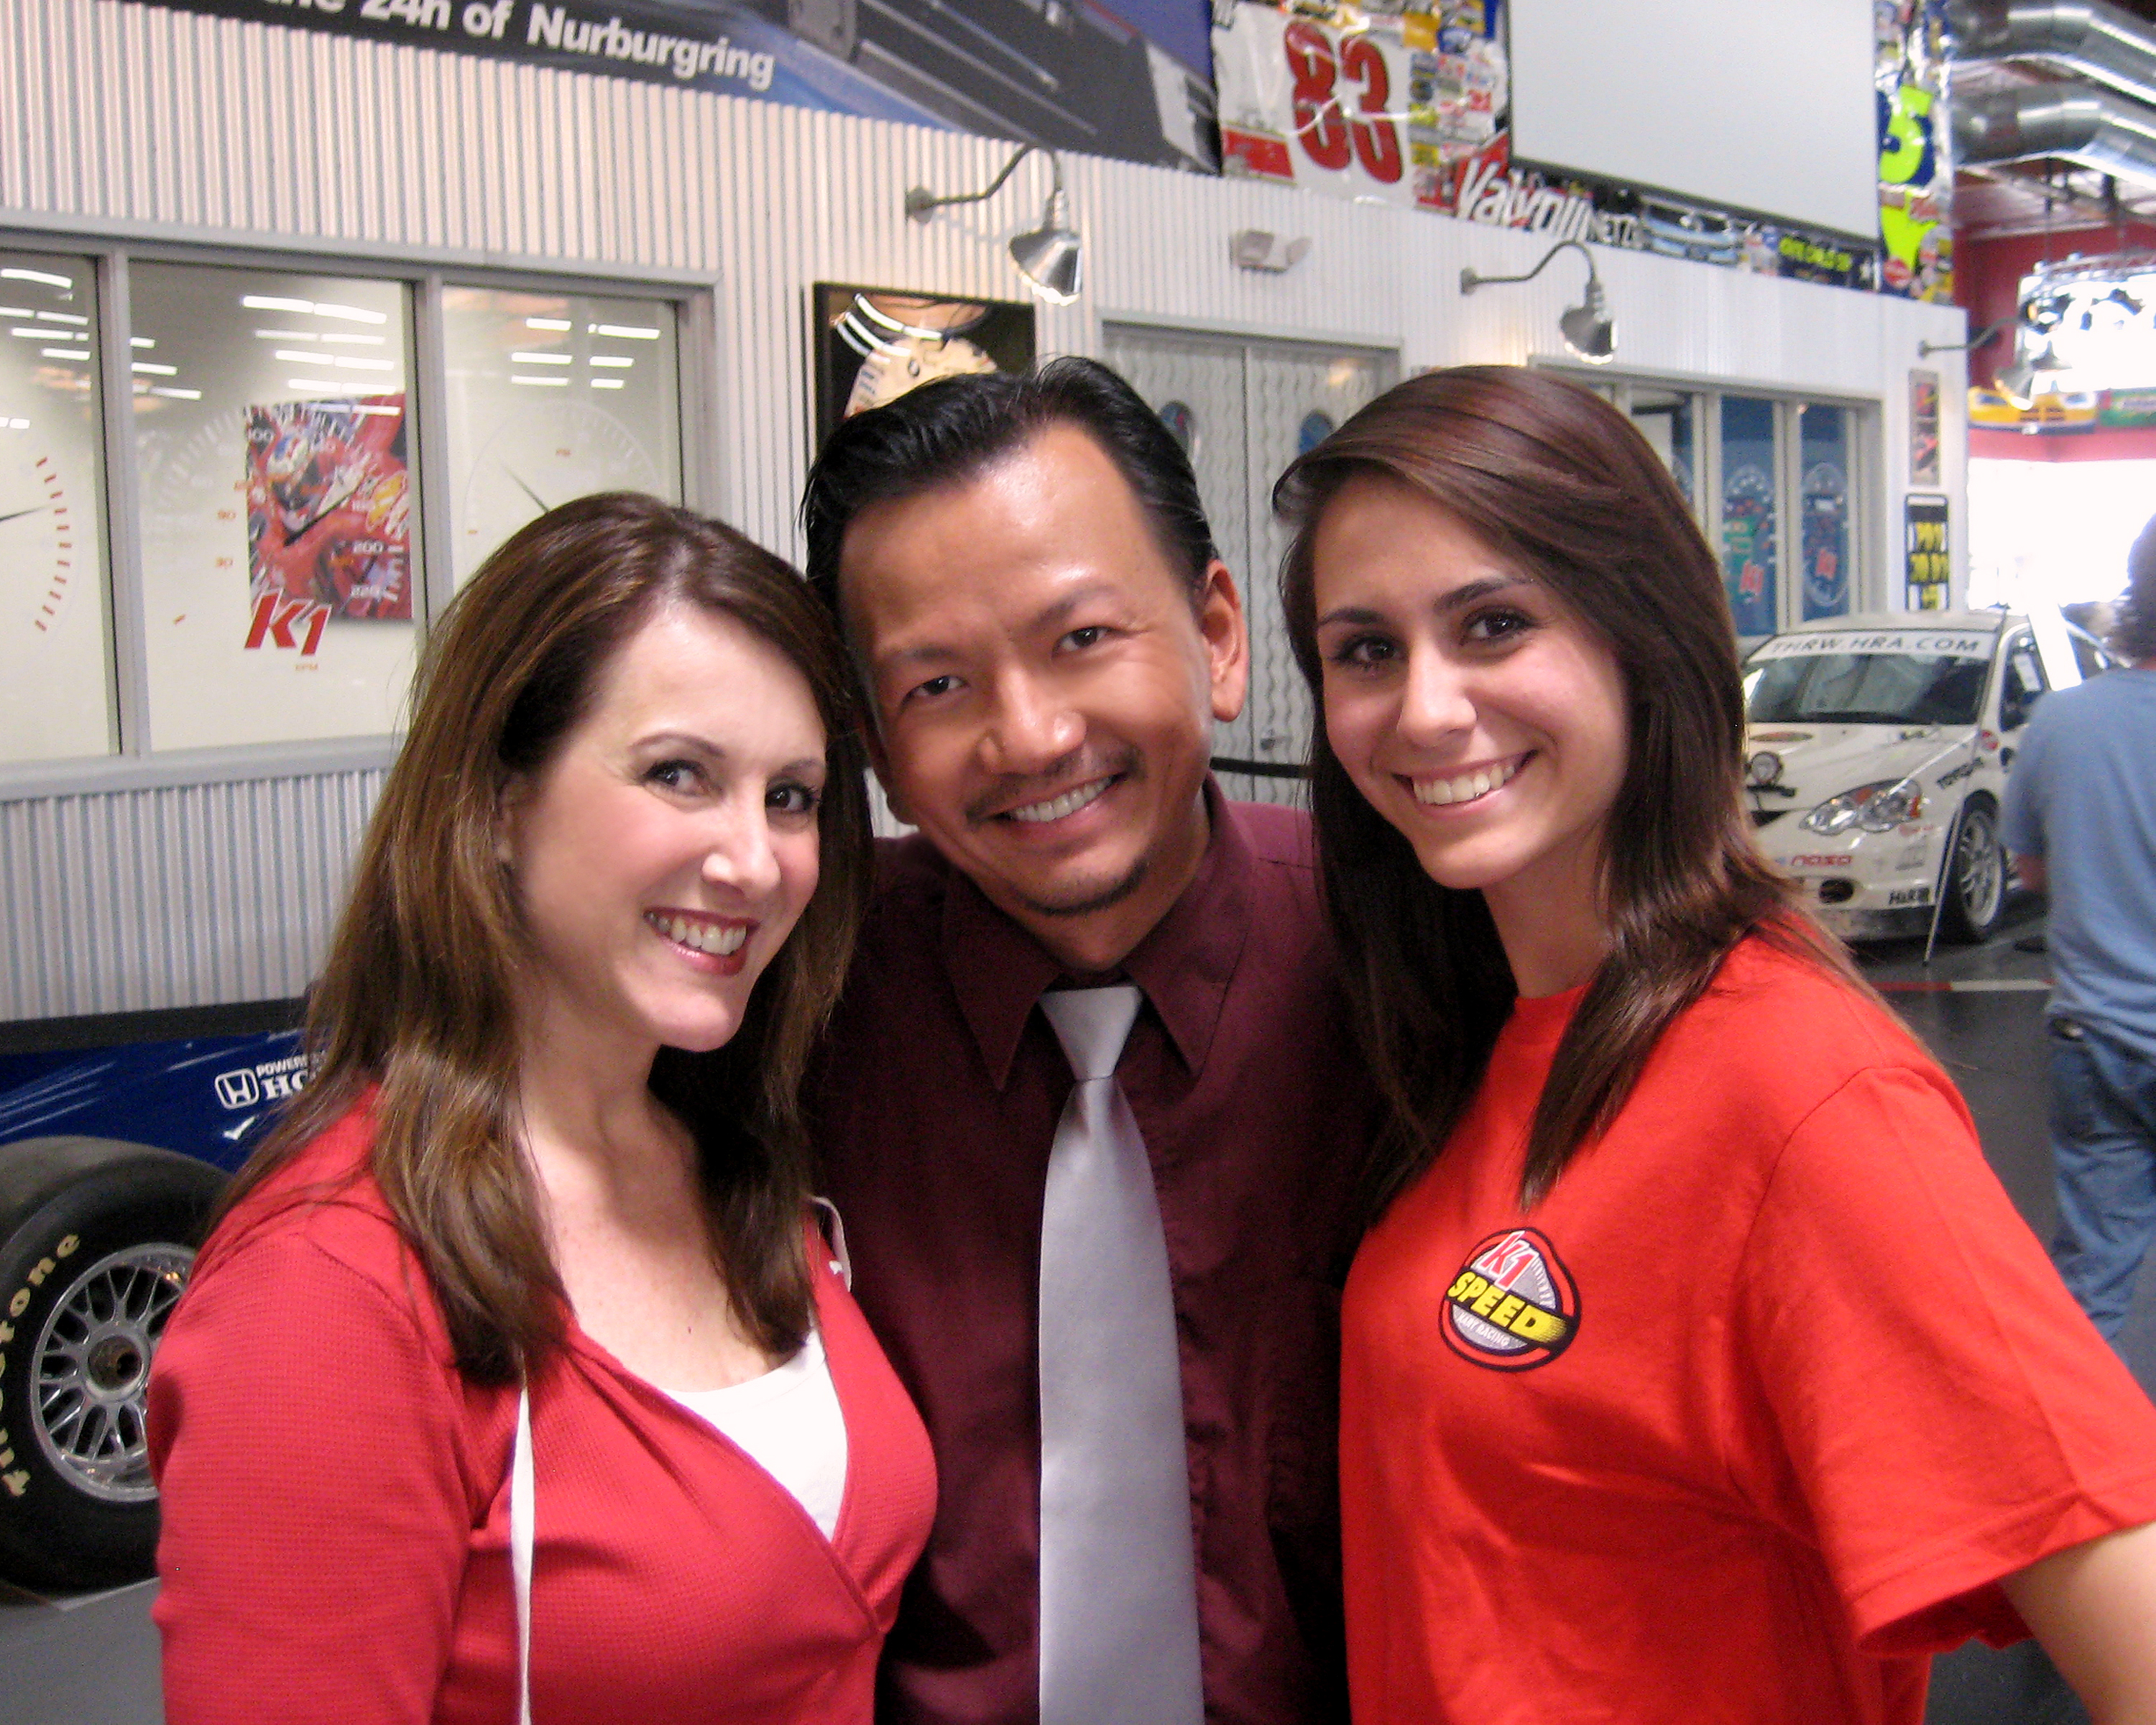 Dolores Kimble, Kevin Trang, and Emily Fitzpatrick on set of 